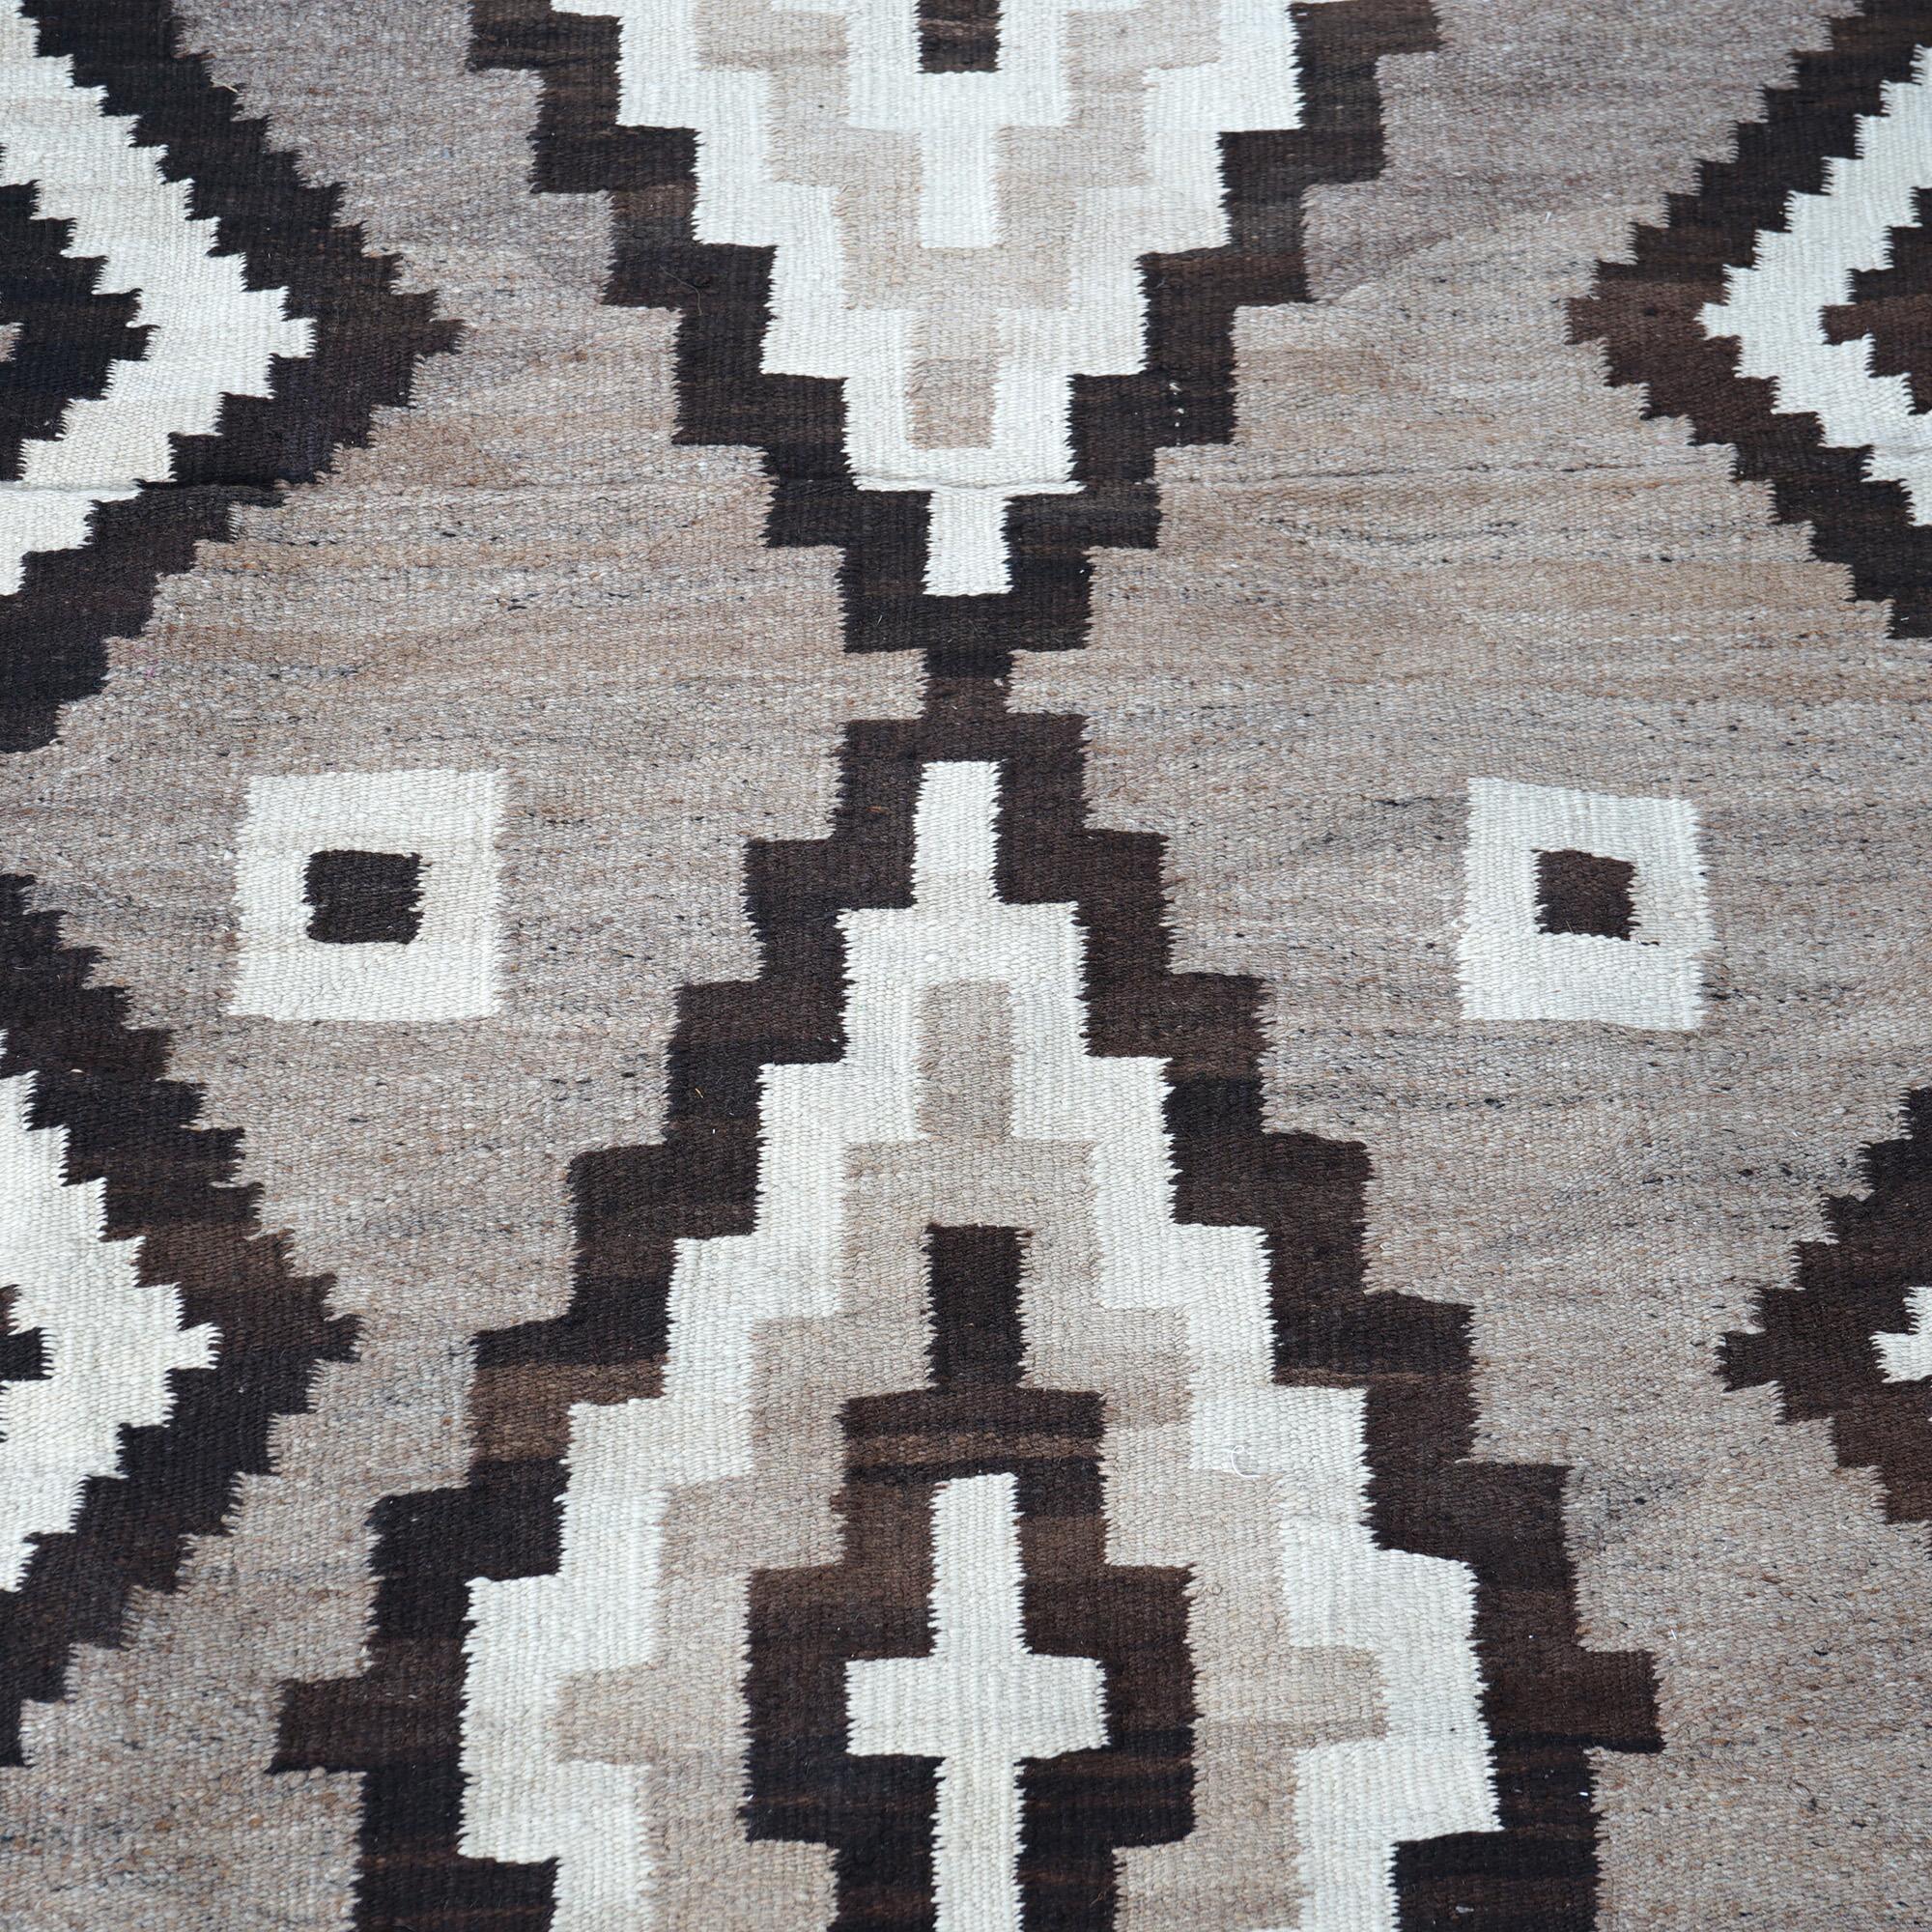 Antique Two Gray Hills Southwest American Indian Navajo Wool Rug Circa 1920 For Sale 6